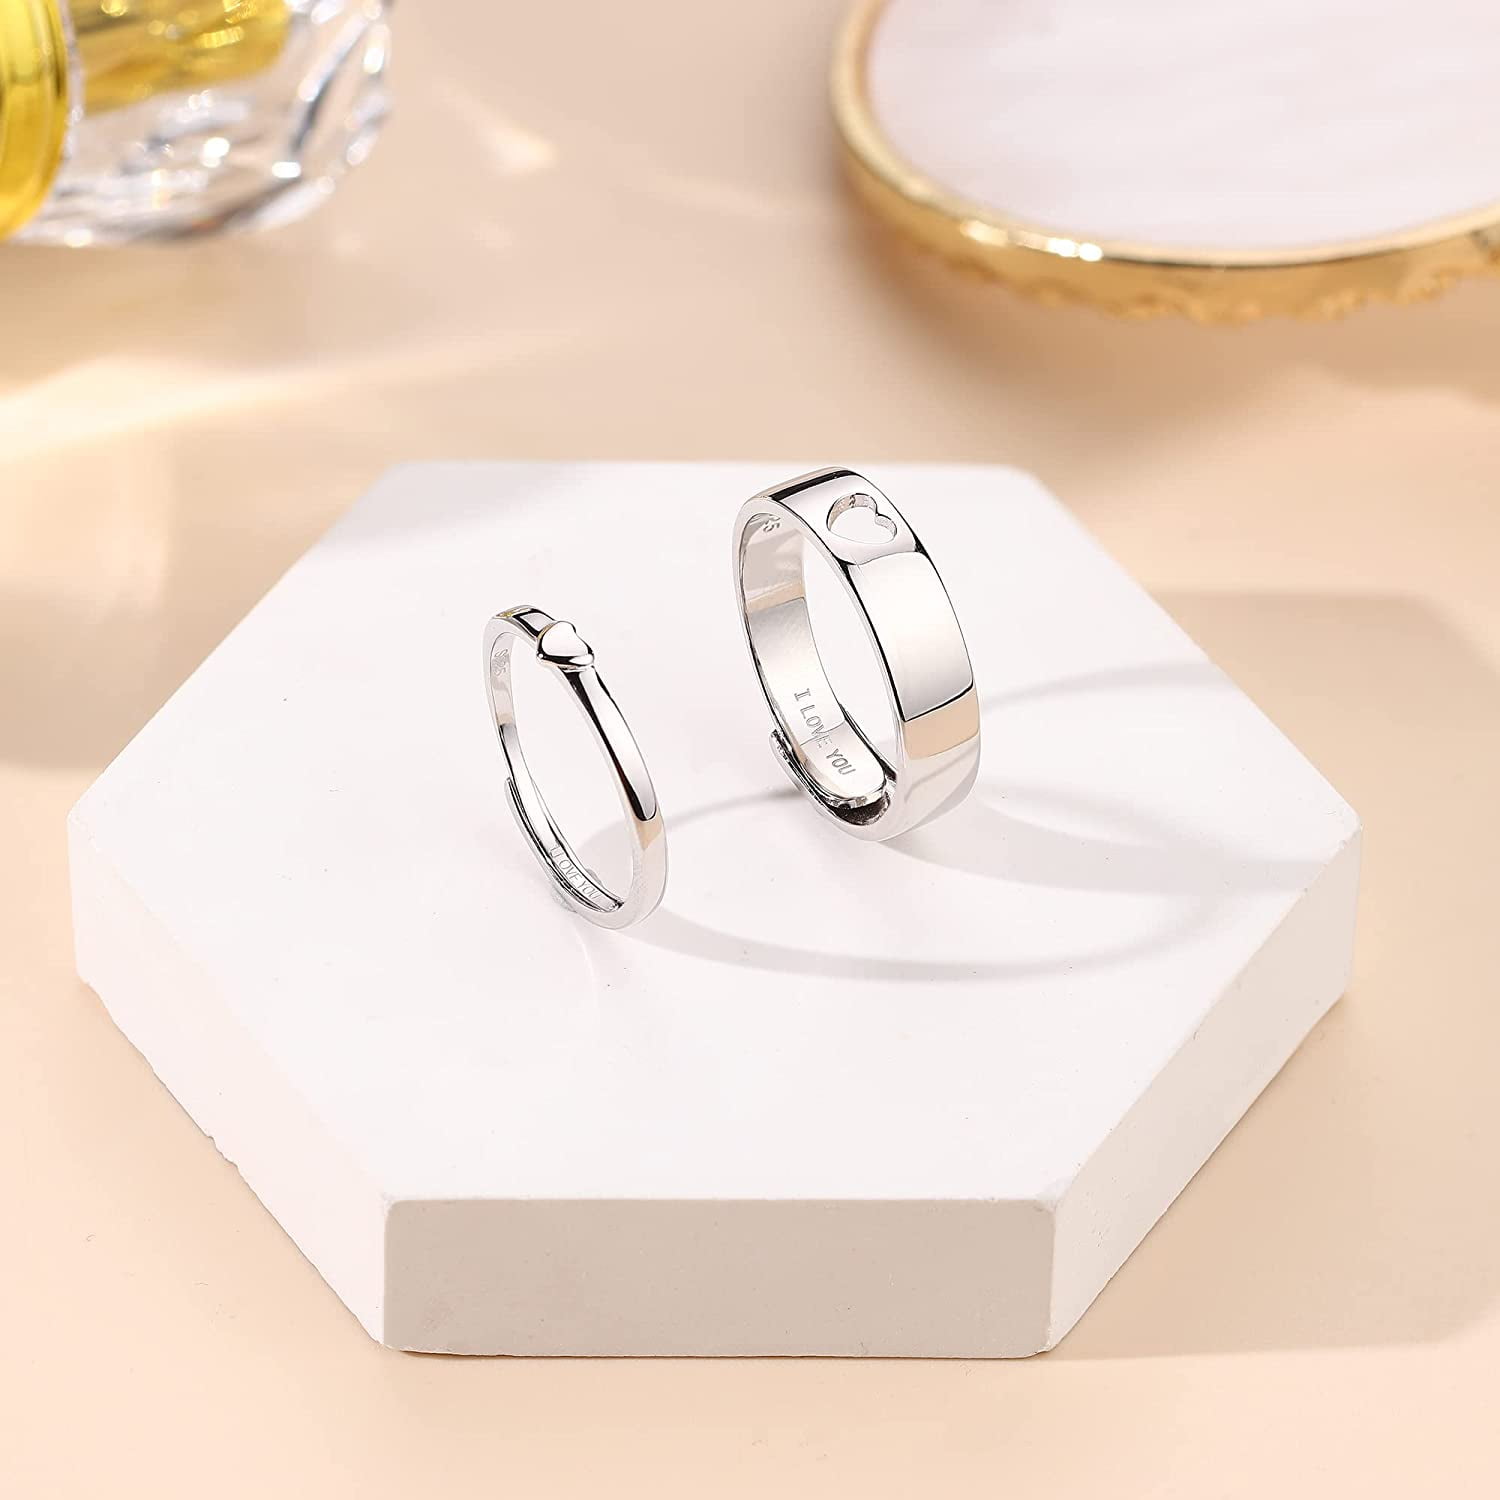 Matching Rings (Gold & Silver) – Regina Jewelry Shop